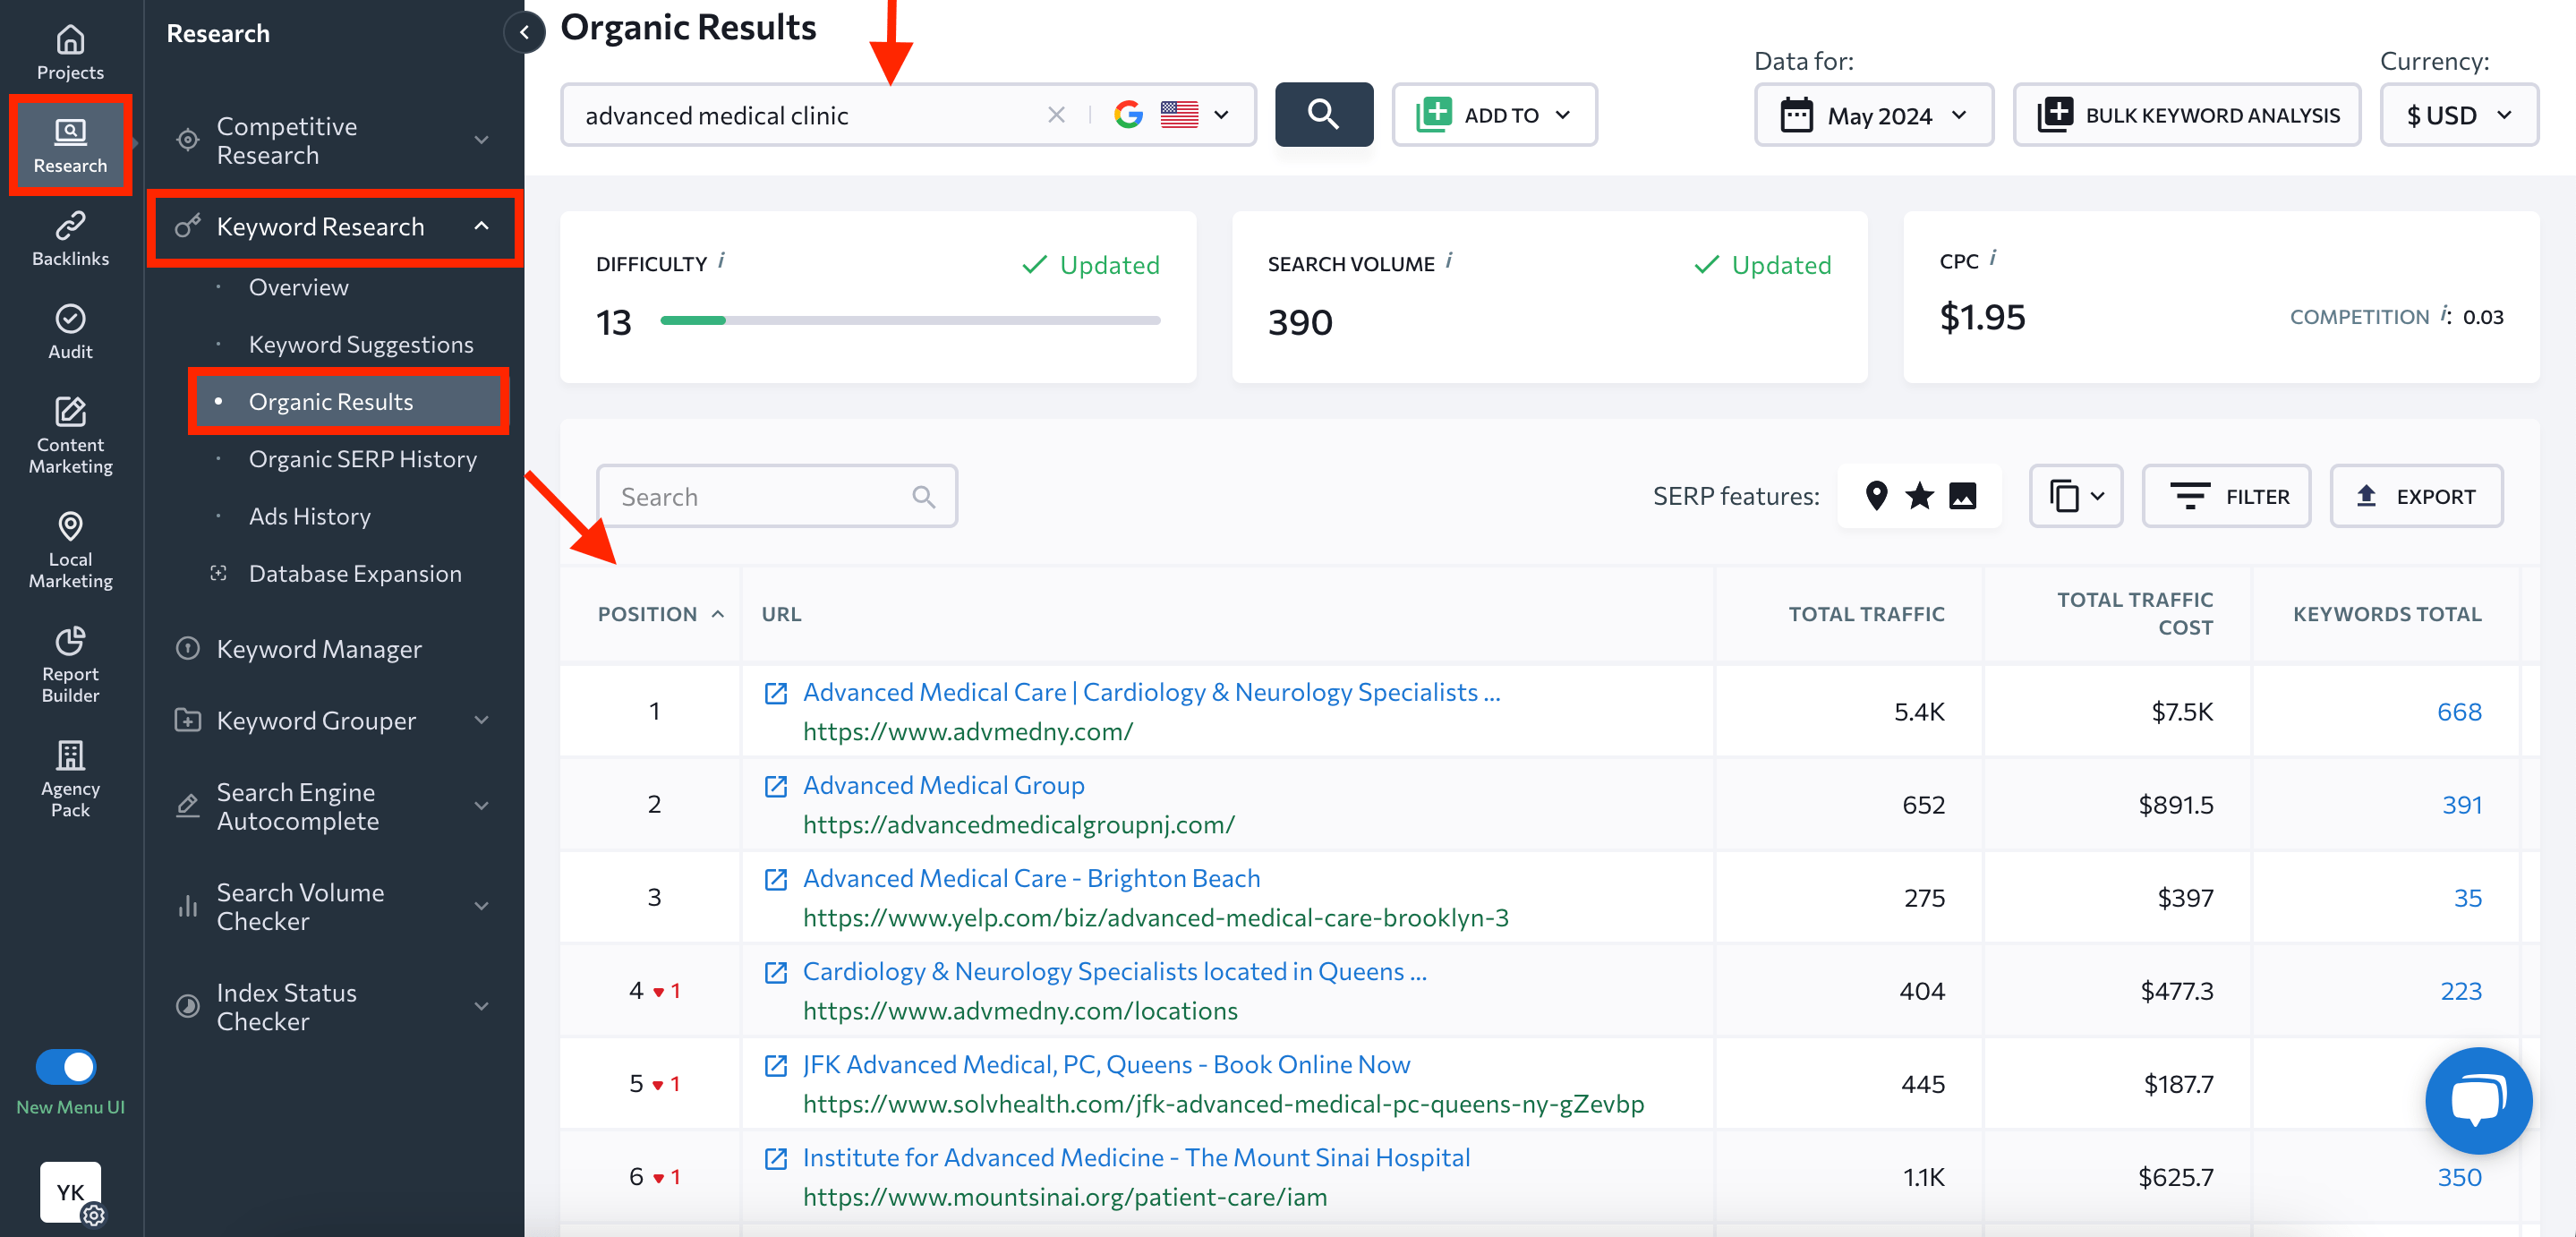 Organic results for your keywords